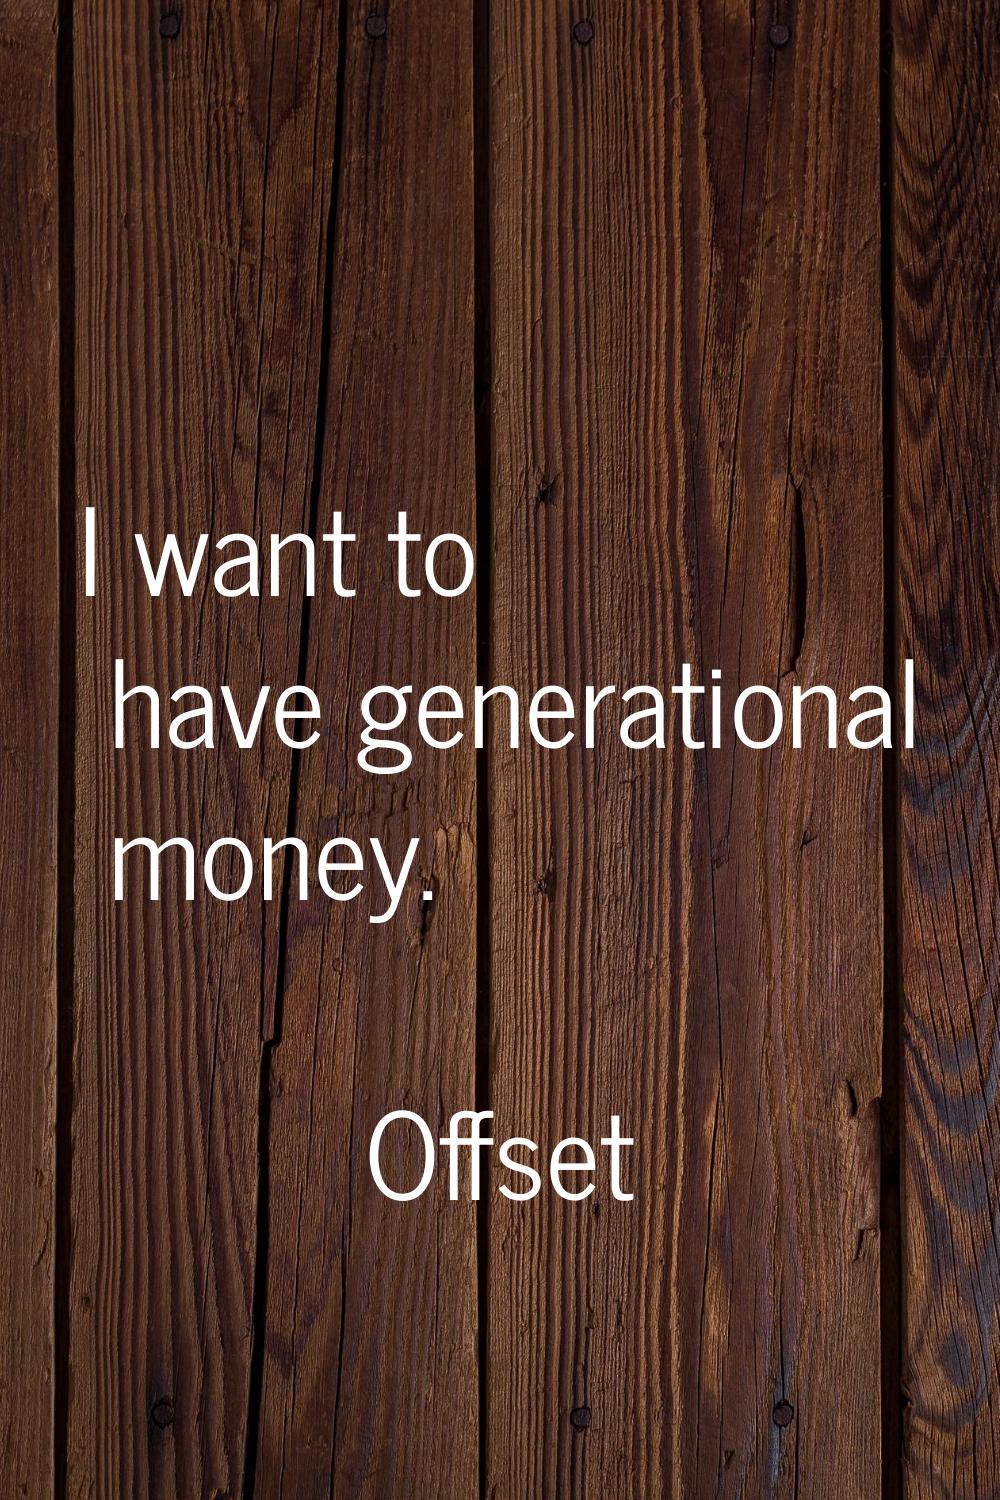 I want to have generational money.